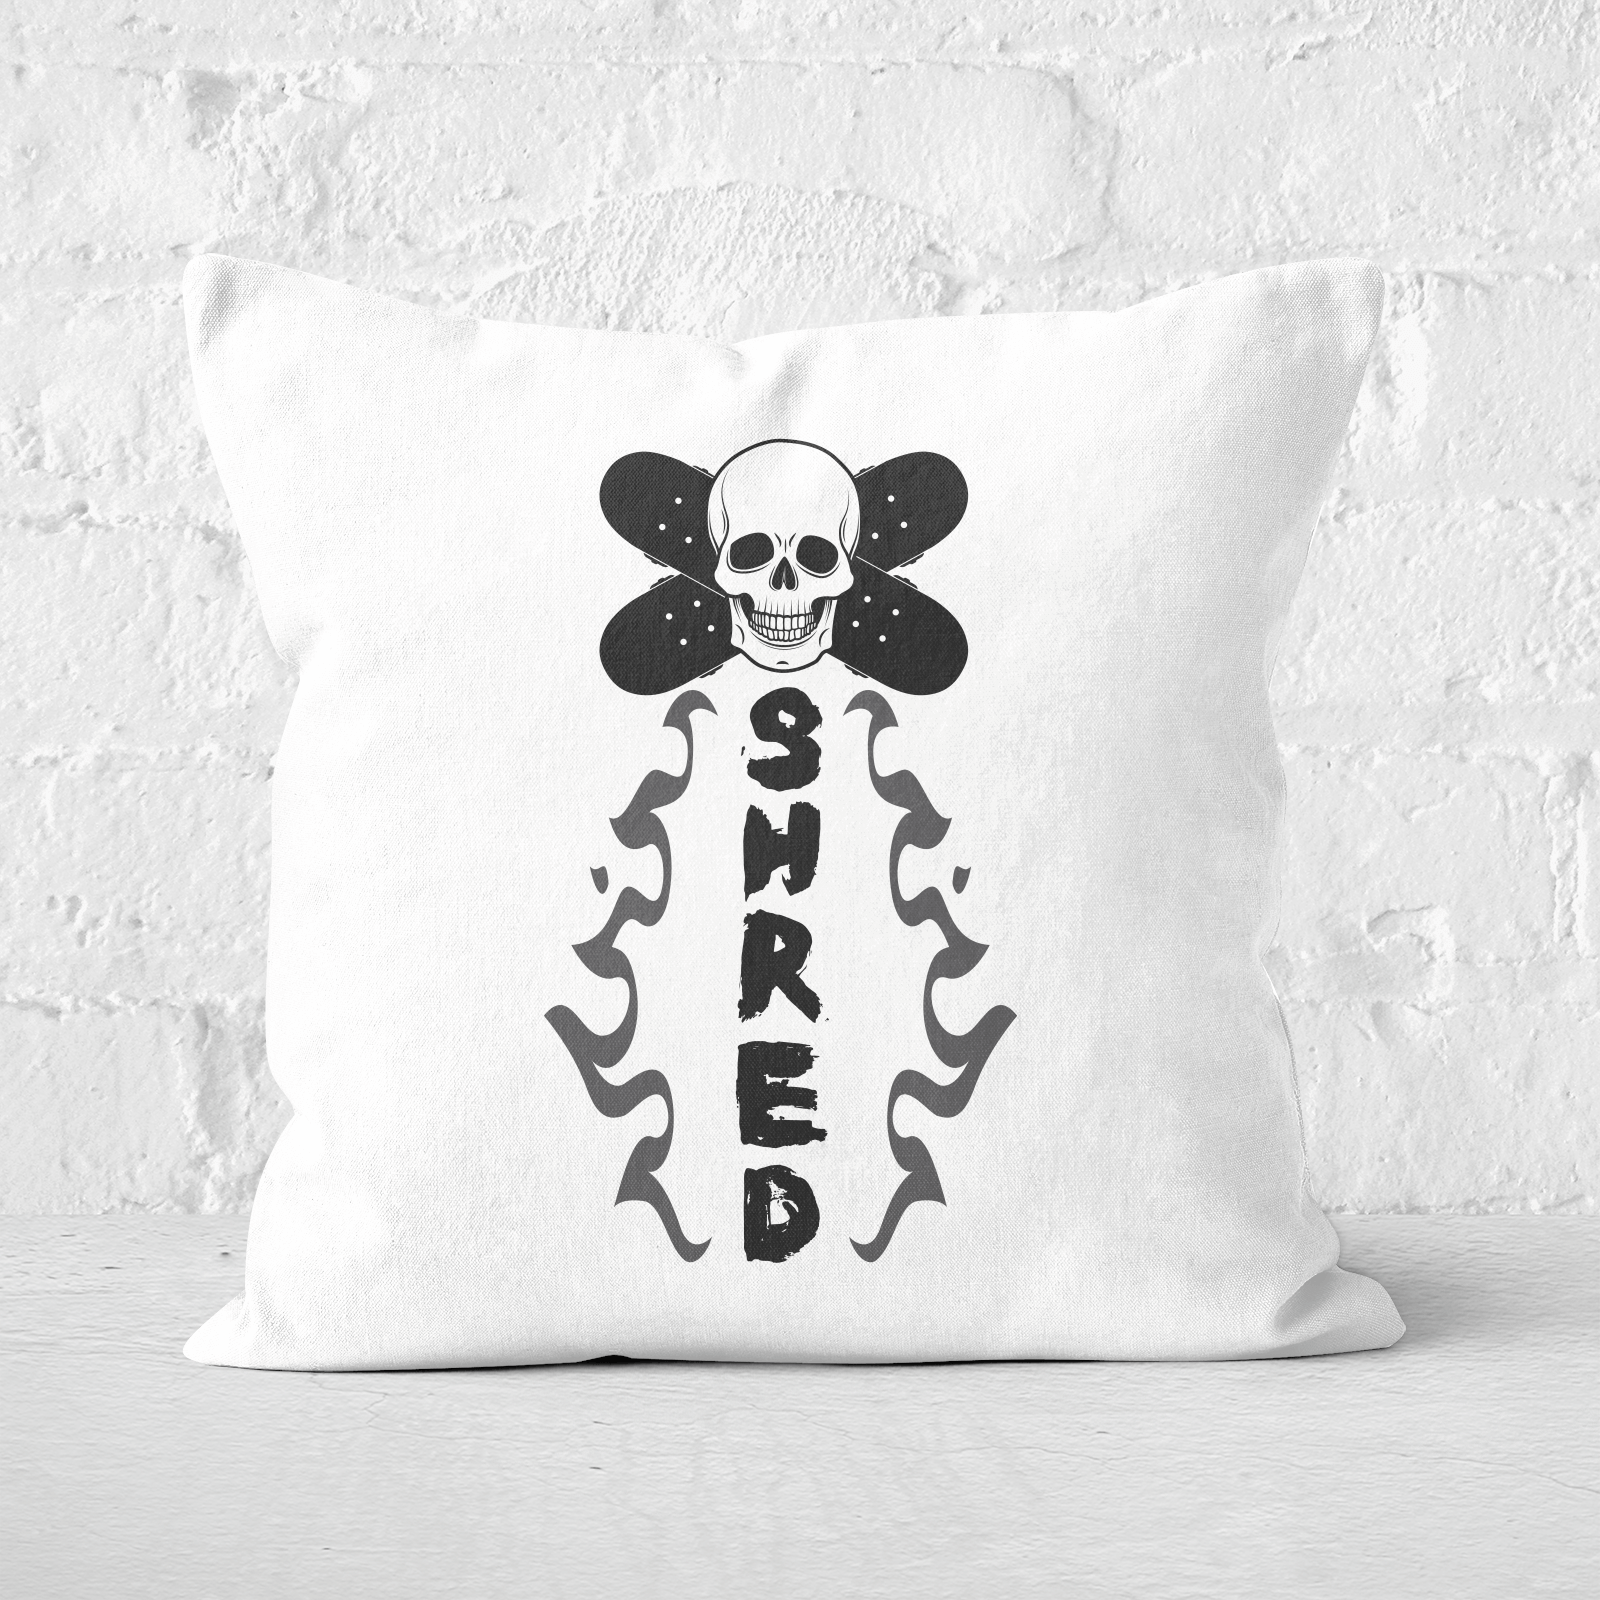 Shred Skateboards Square Cushion - 60x60cm - Soft Touch